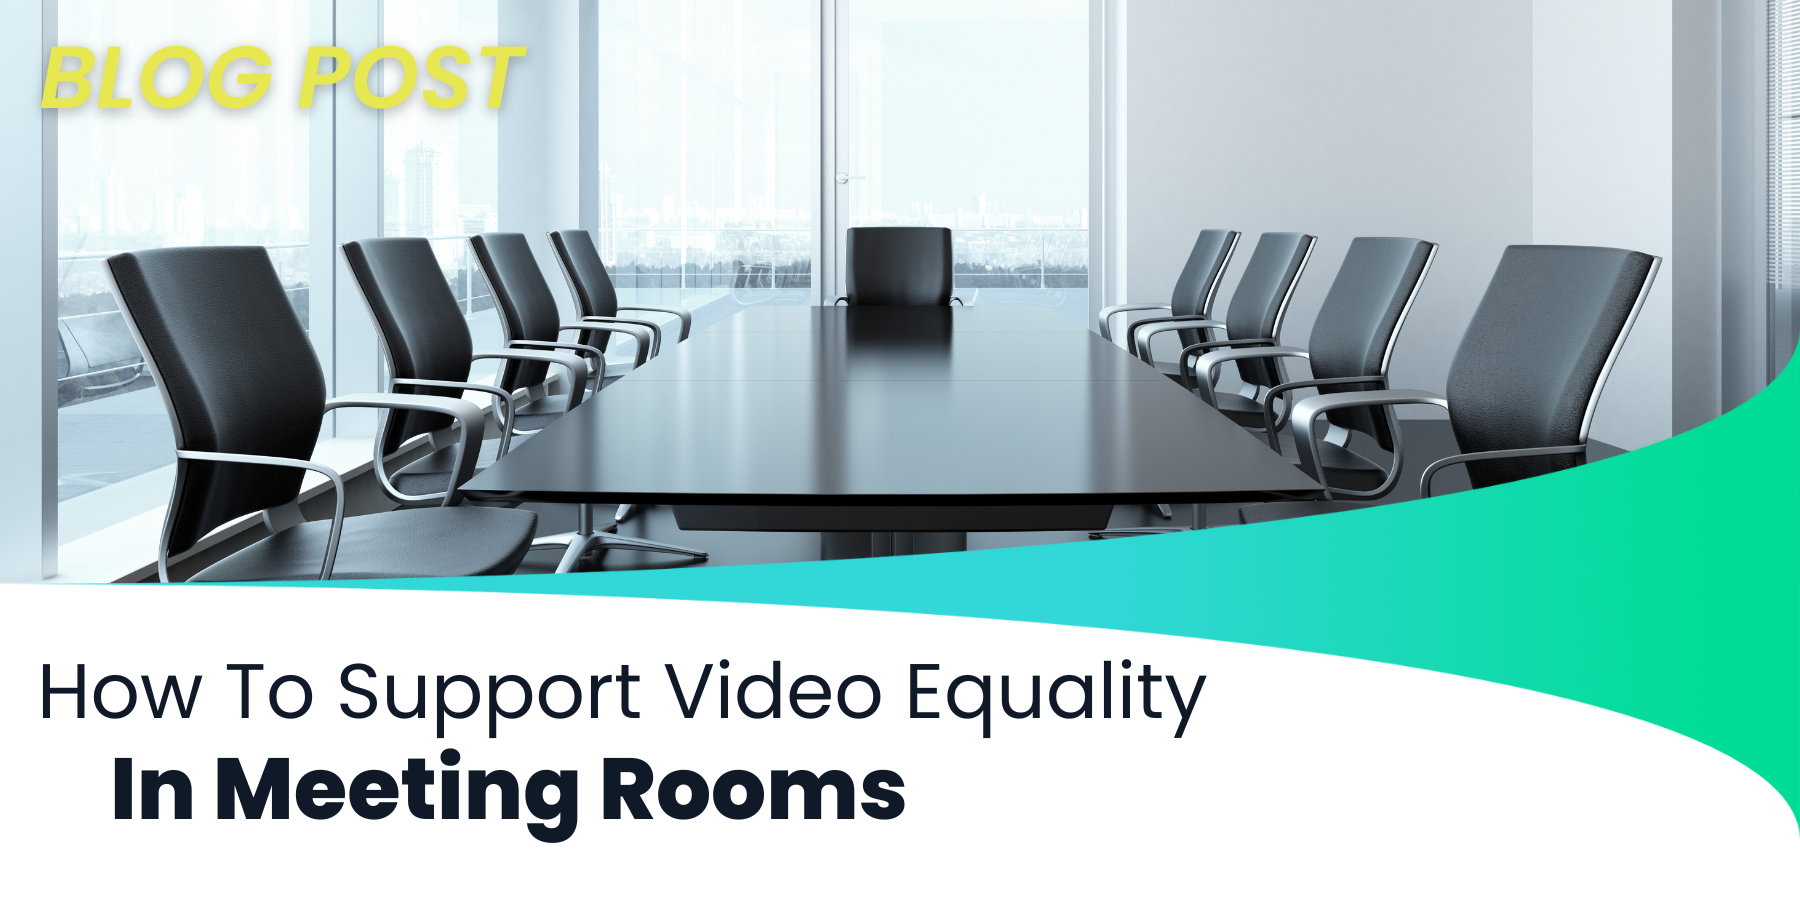 Video Equality Meeting Rooms